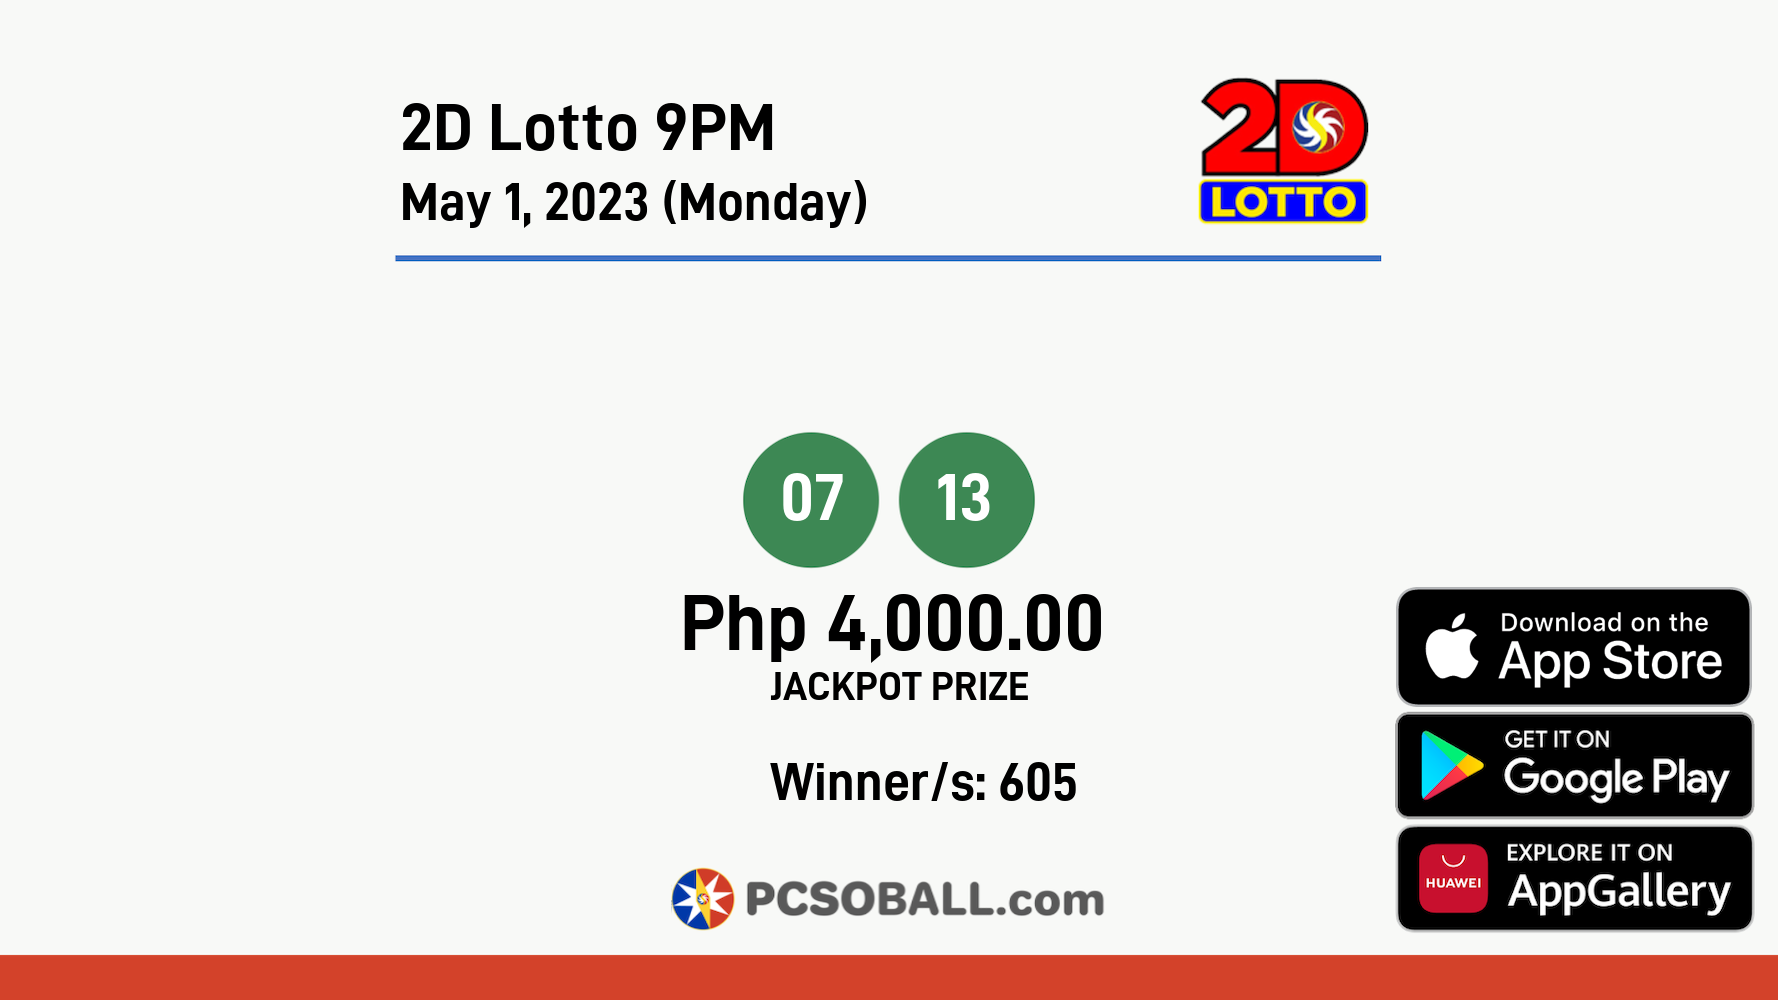 2D Lotto 9PM May 1, 2023 (Monday) Result